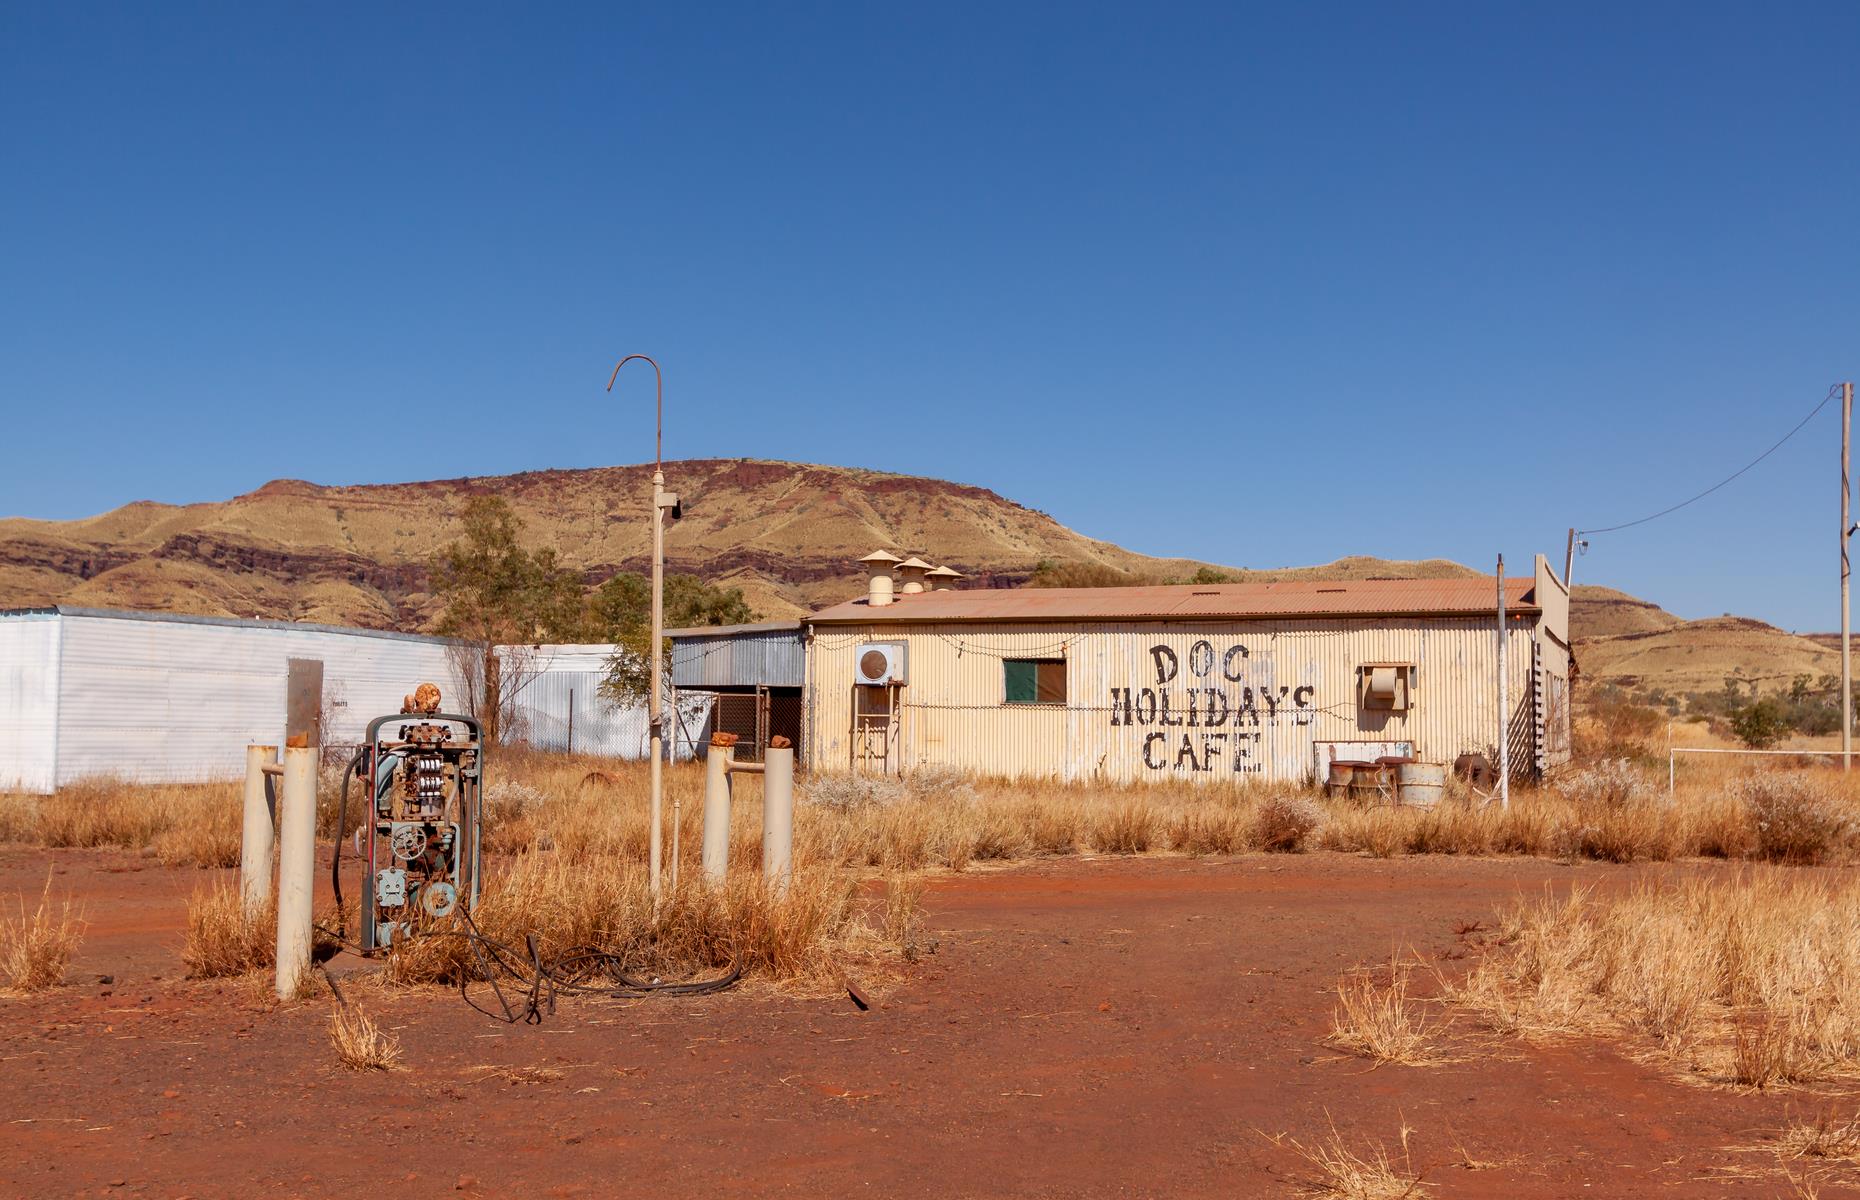 <p>After the closure, the population began to rapidly decline, leaving buildings like Doc Holiday's Cafe to the dust. In 2007, the Western Australia Government officially struck Wittenoom off the map and cut off the town's electricity supply and mail services.</p>